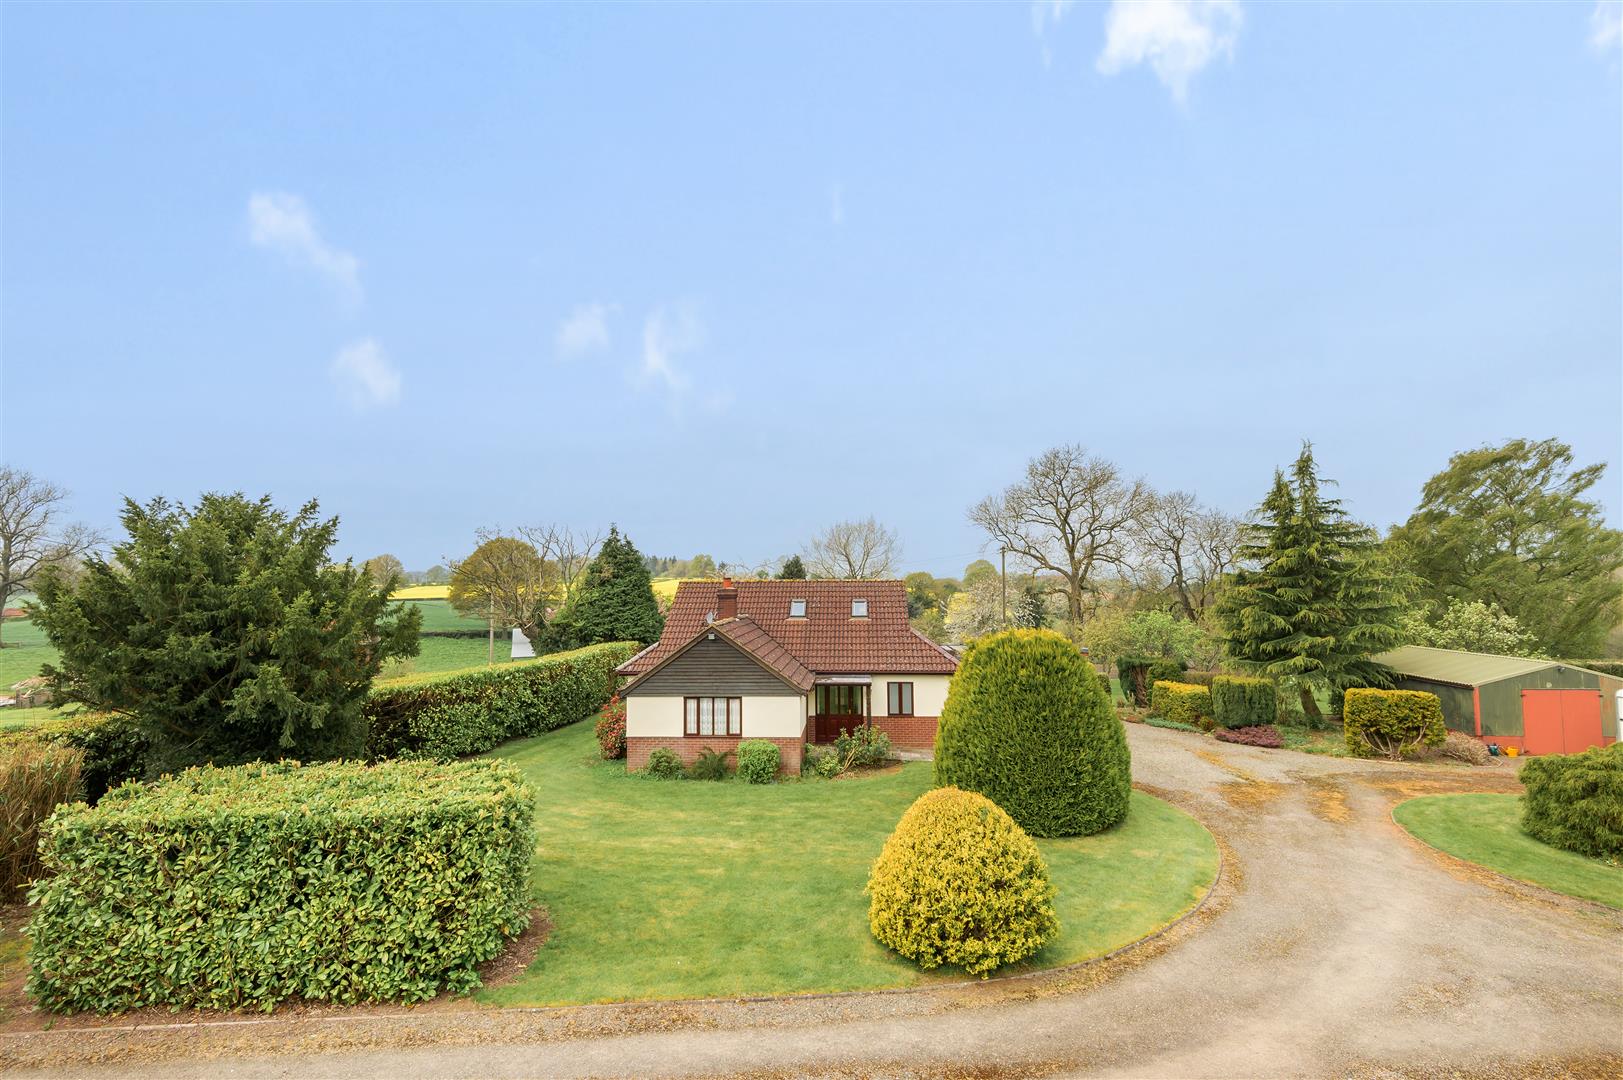 4 bed country house for sale in Middleton On The Hill, HR6